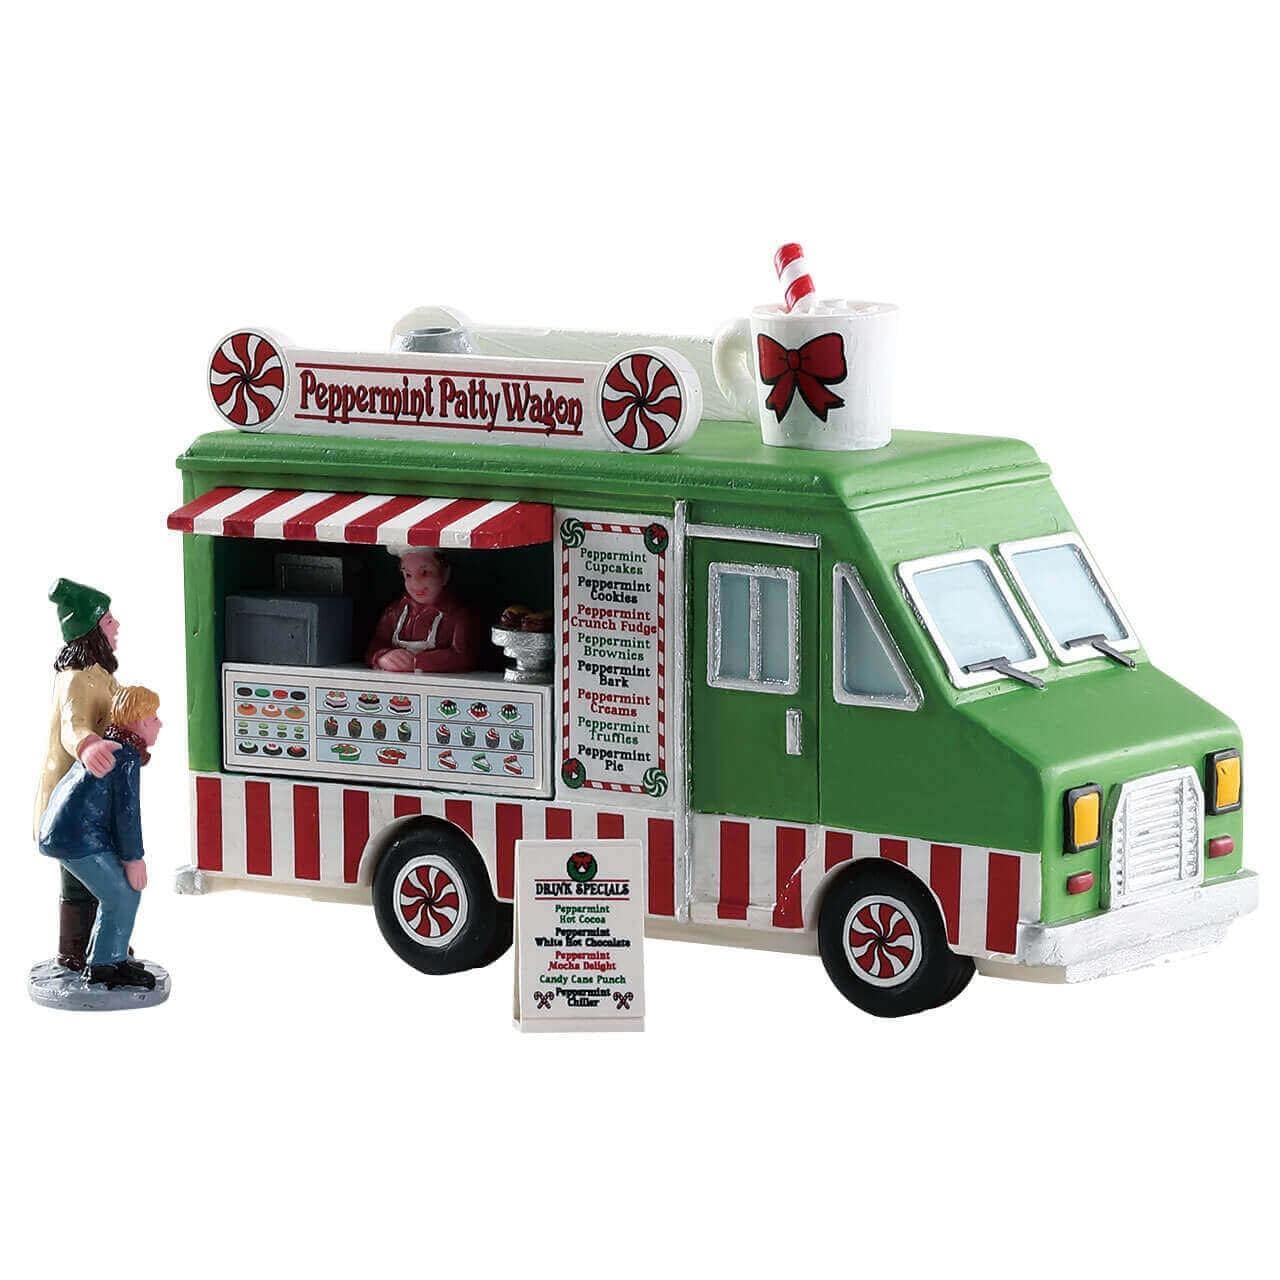 Lemax Table Accent Lemax Peppermint Food Truck, Set of 3